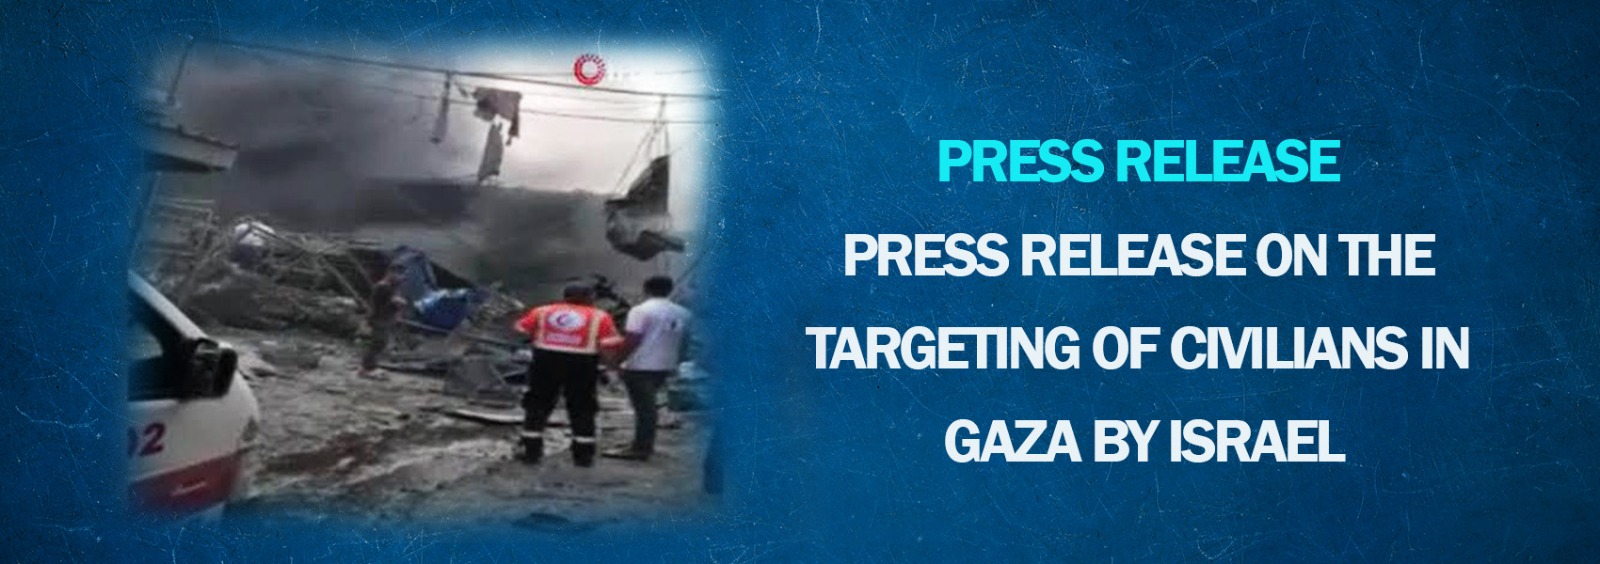 Press Release on The Targeting of Civilians in Gaza by Israel